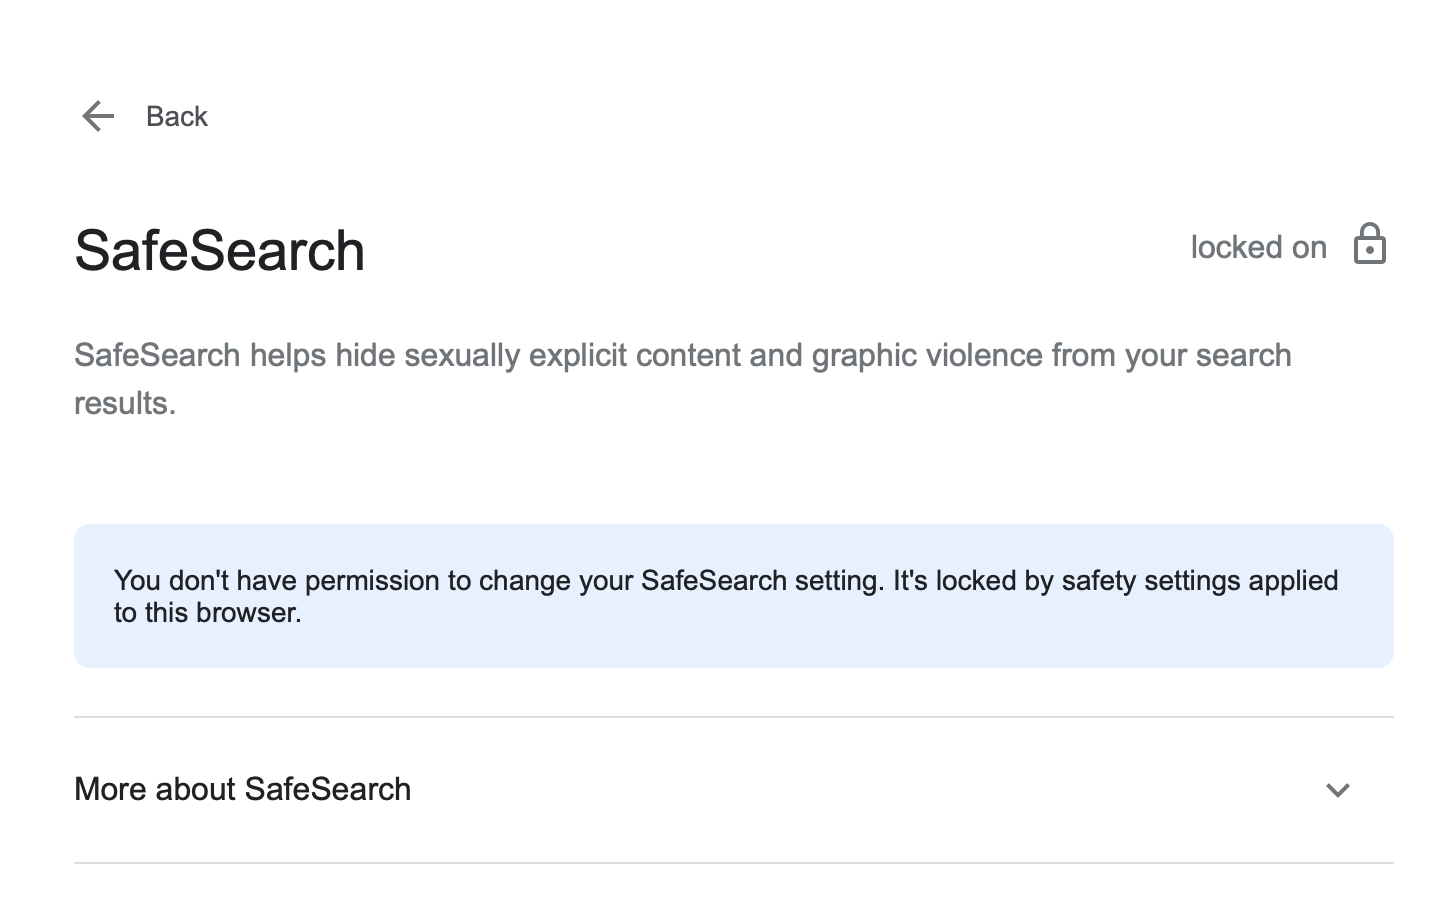 SafeSearch Locked on screen